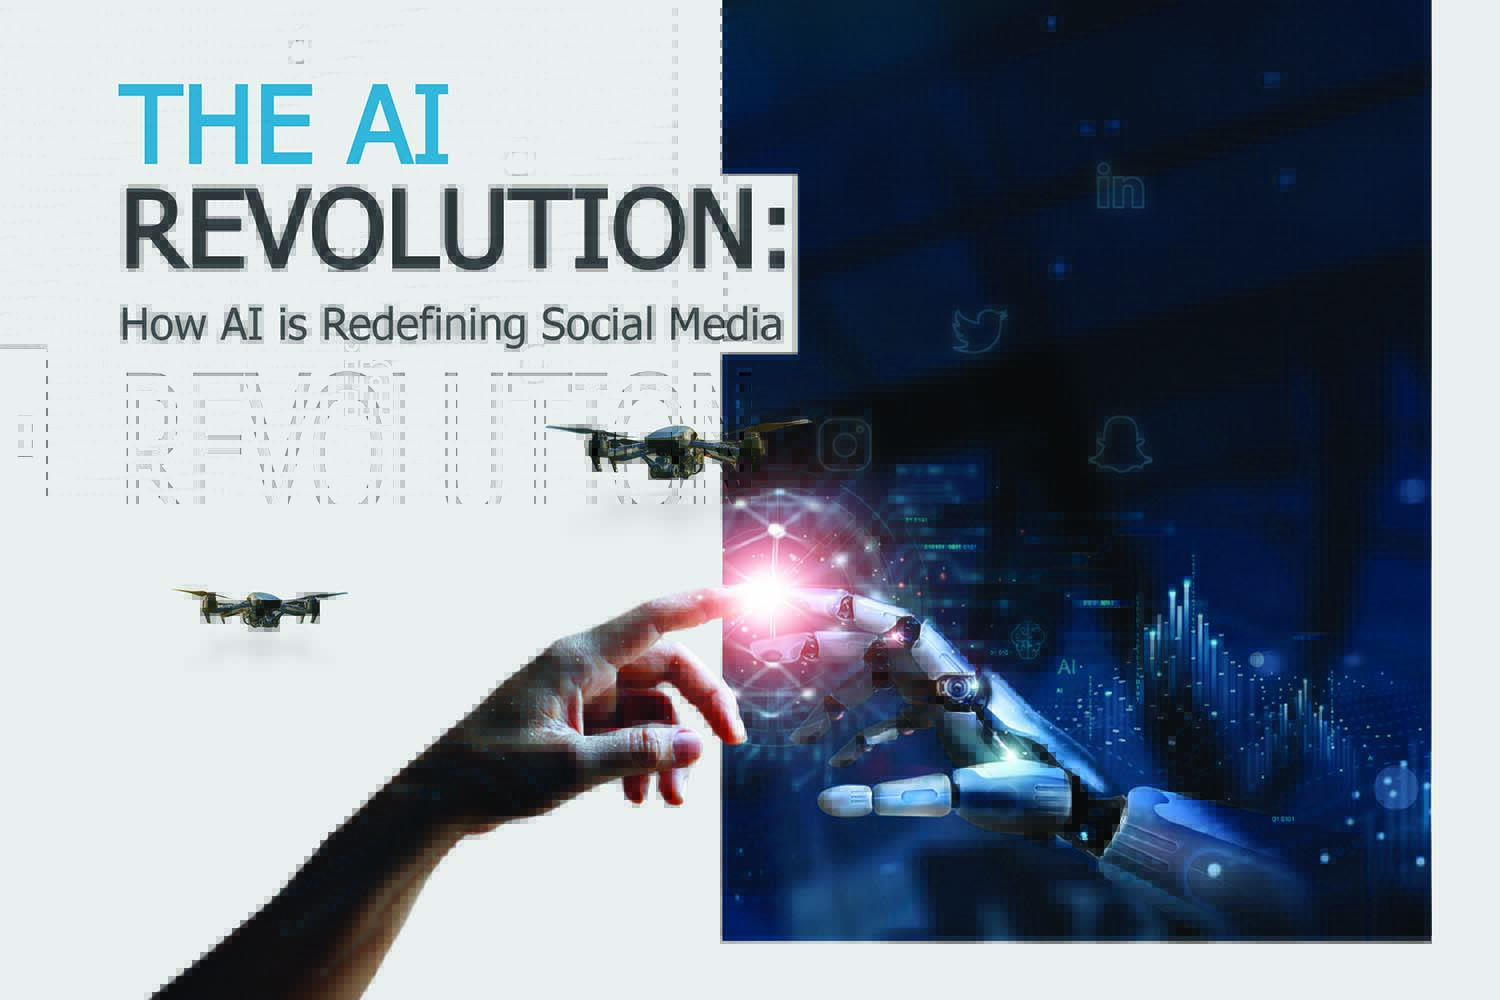 The AI Revolution: How AI is Redefining Social Media